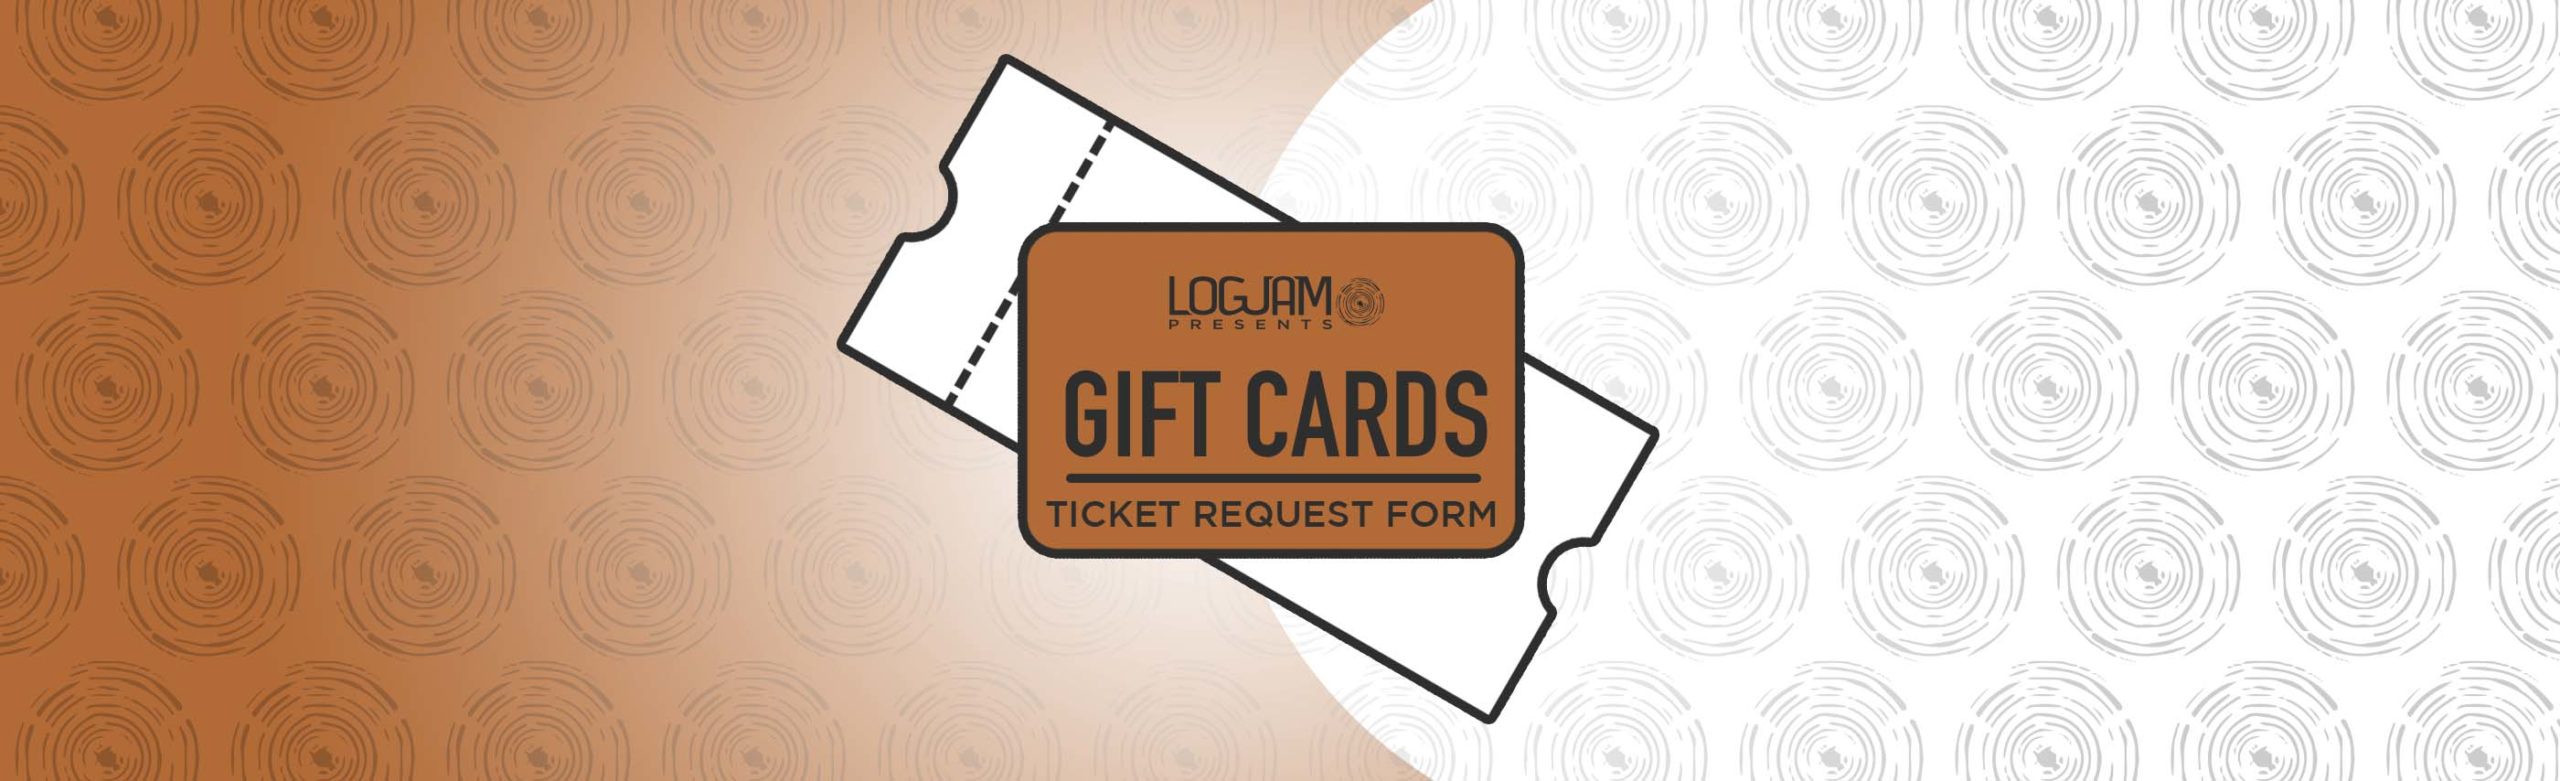 Gift Card – Ticket Request Form